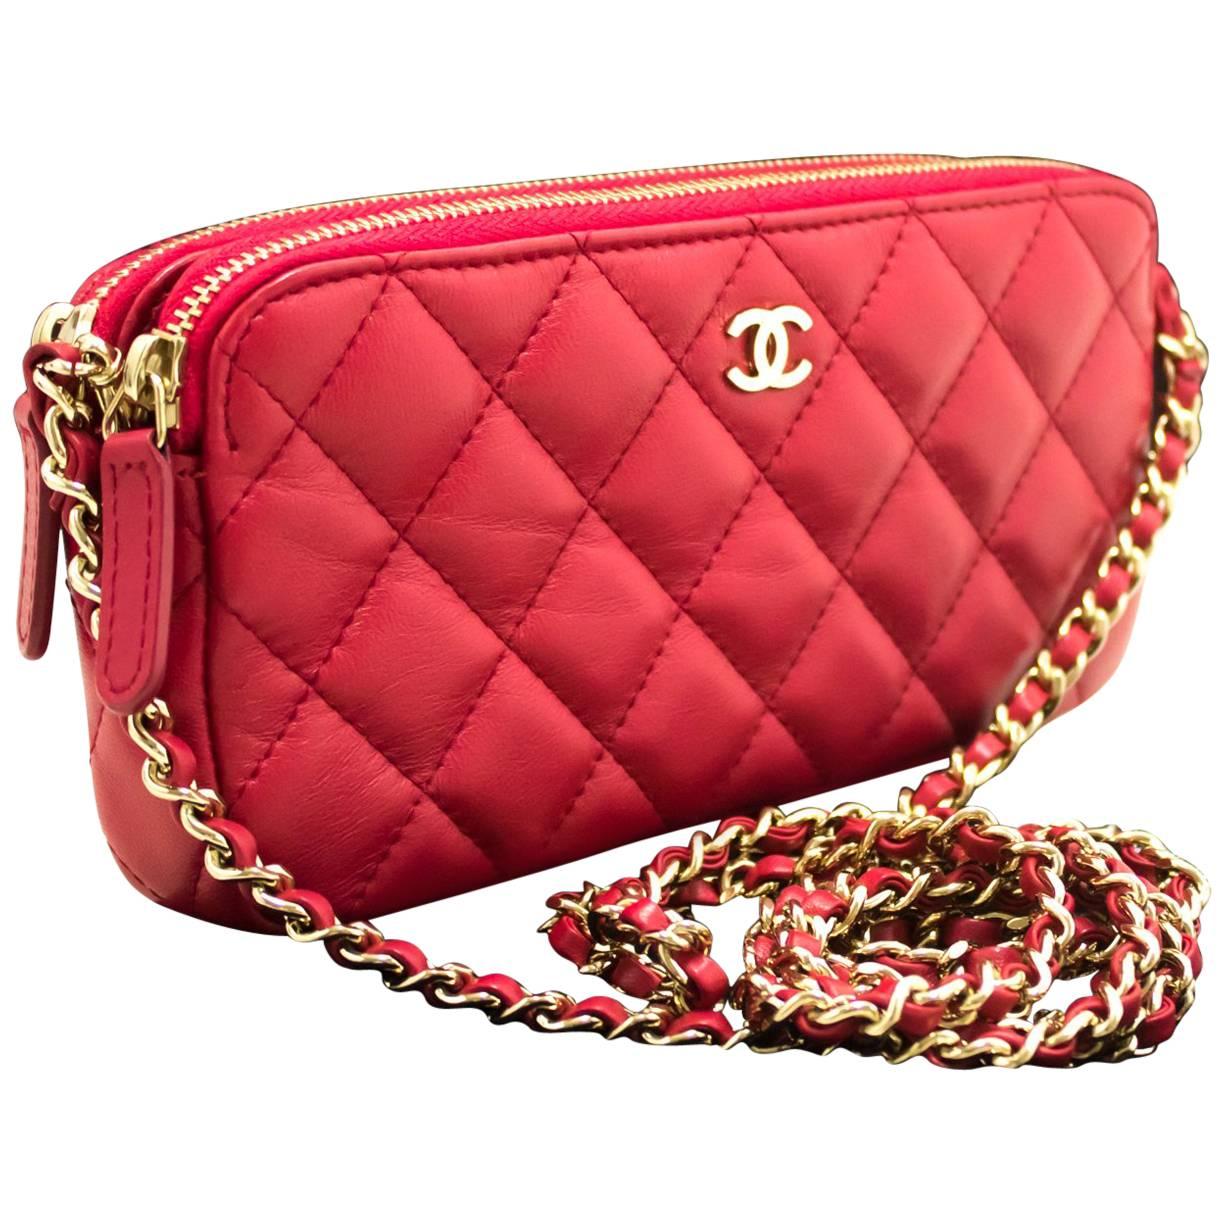 CHANEL Red Wallet On Chain WOC Double Zip Chain Shoulder Bag